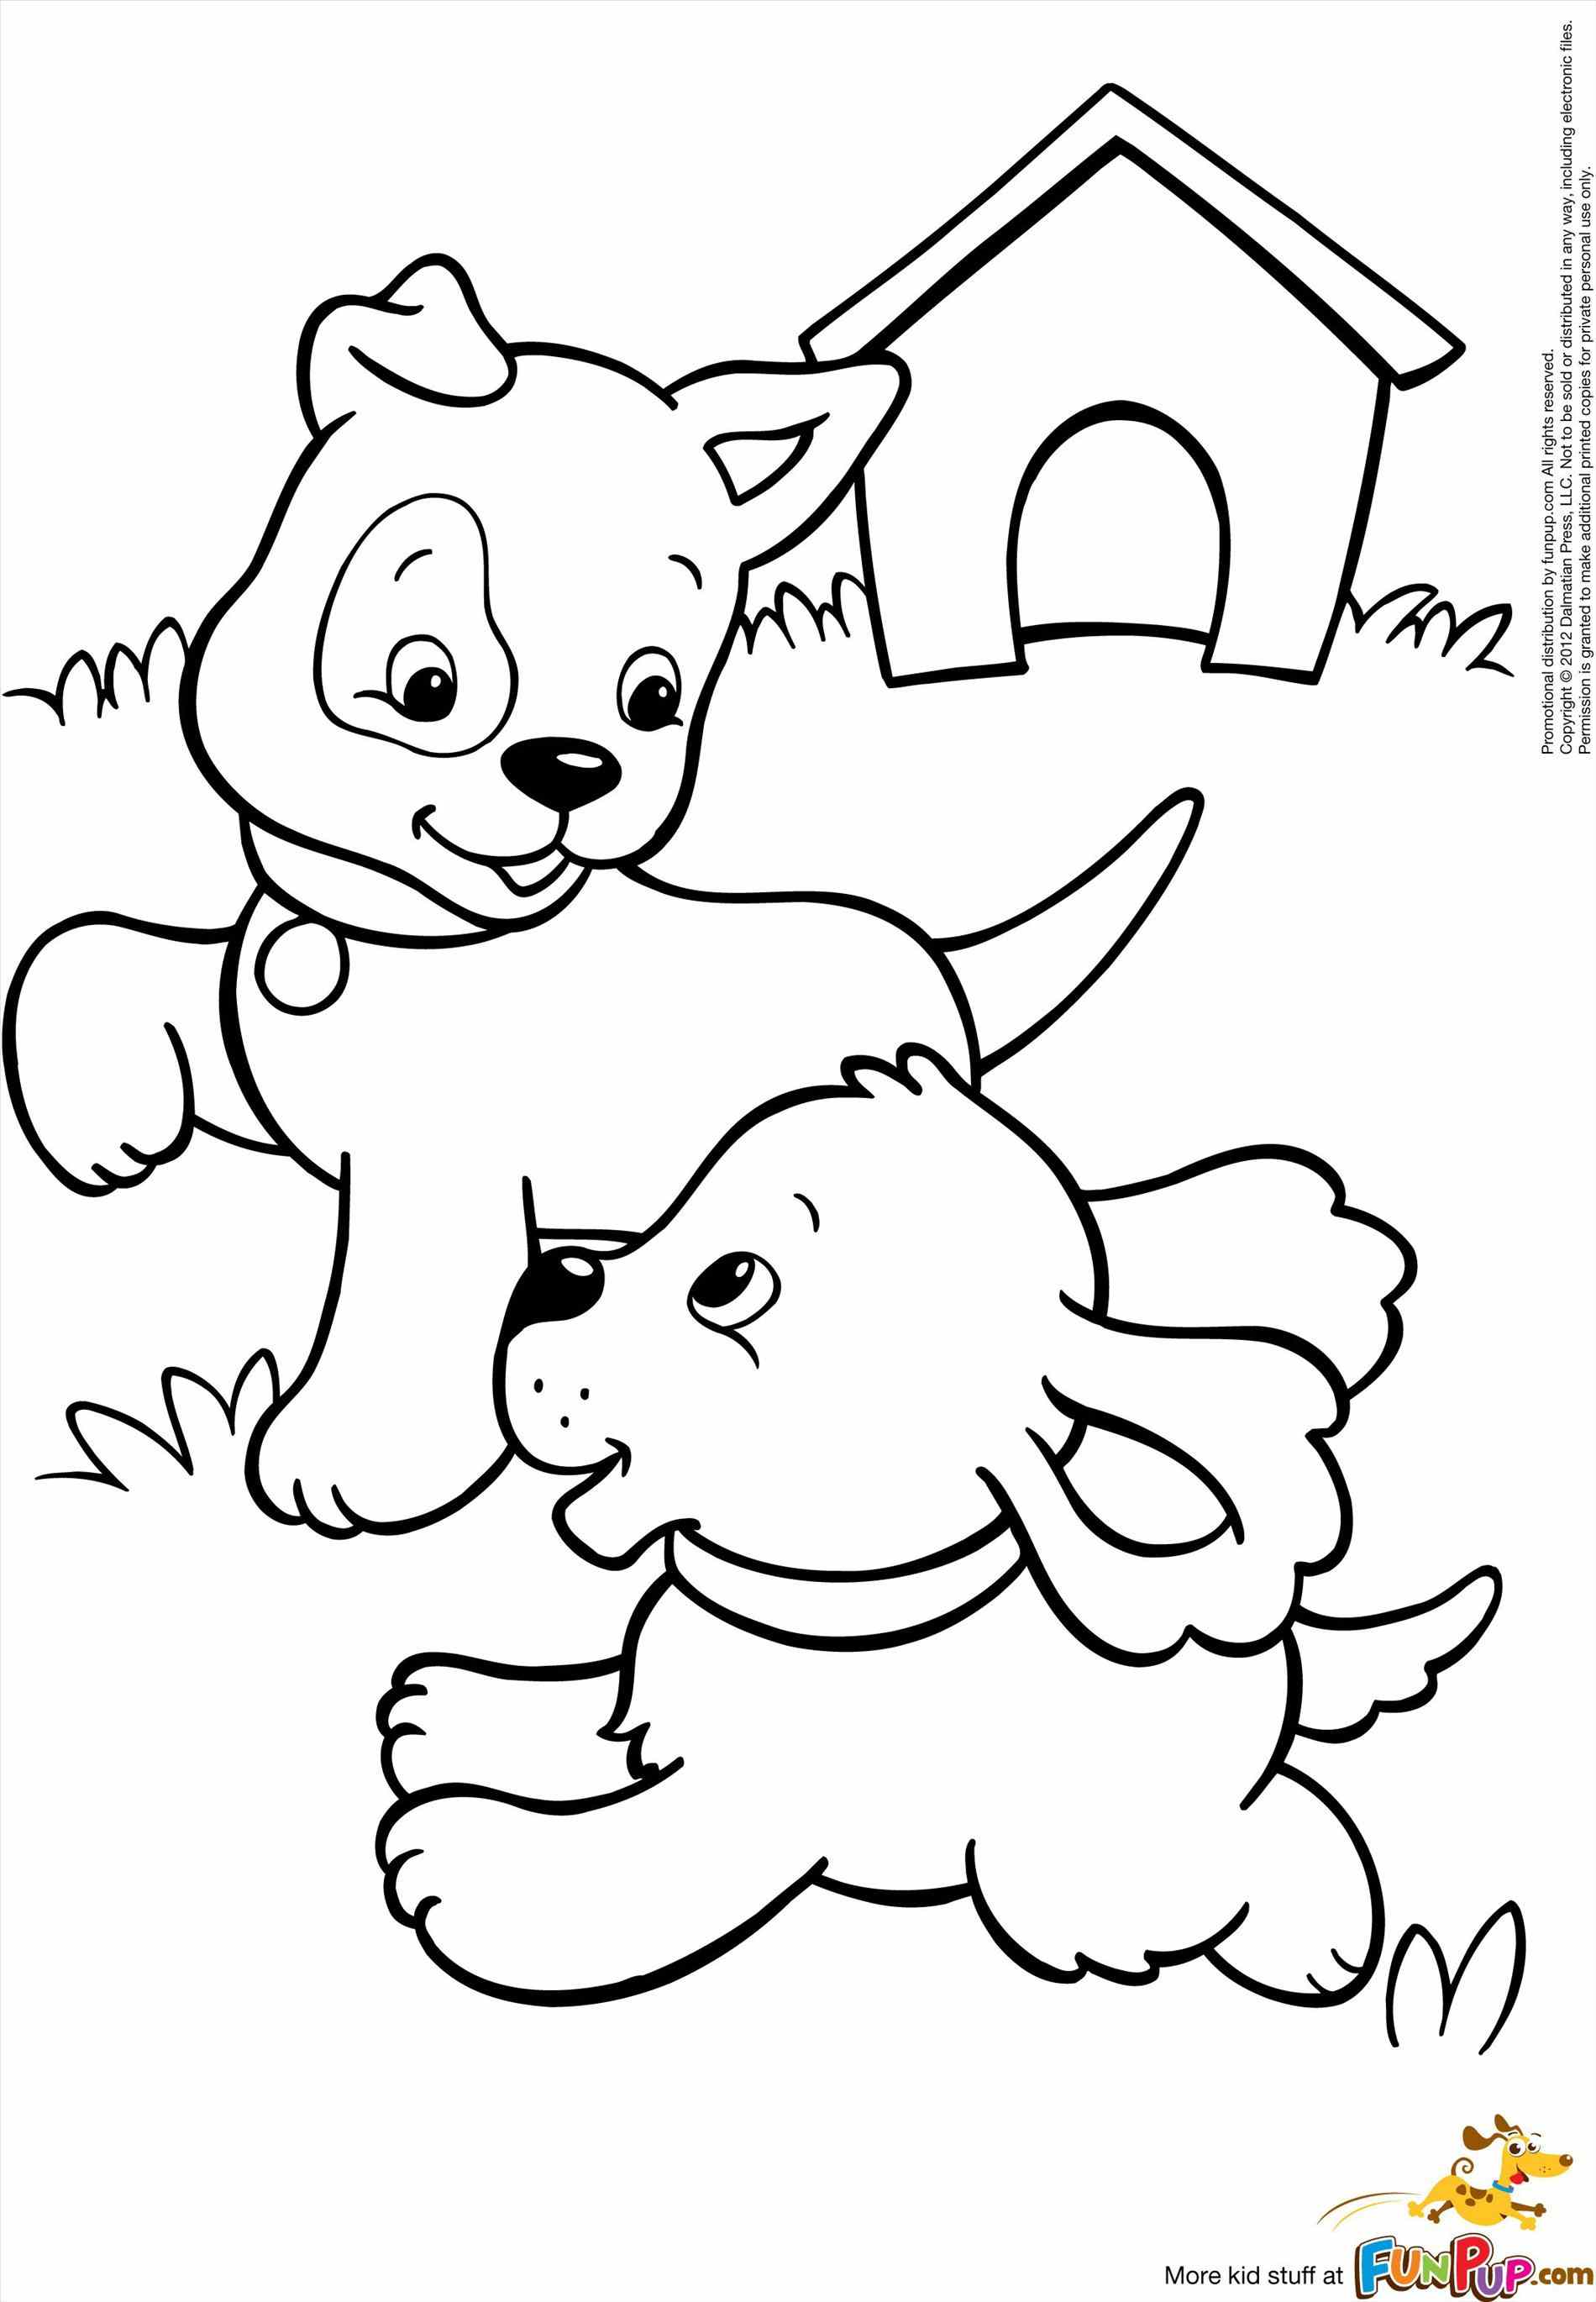 Puppy And Kitten Coloring Pages To Print at GetColorings.com | Free ...